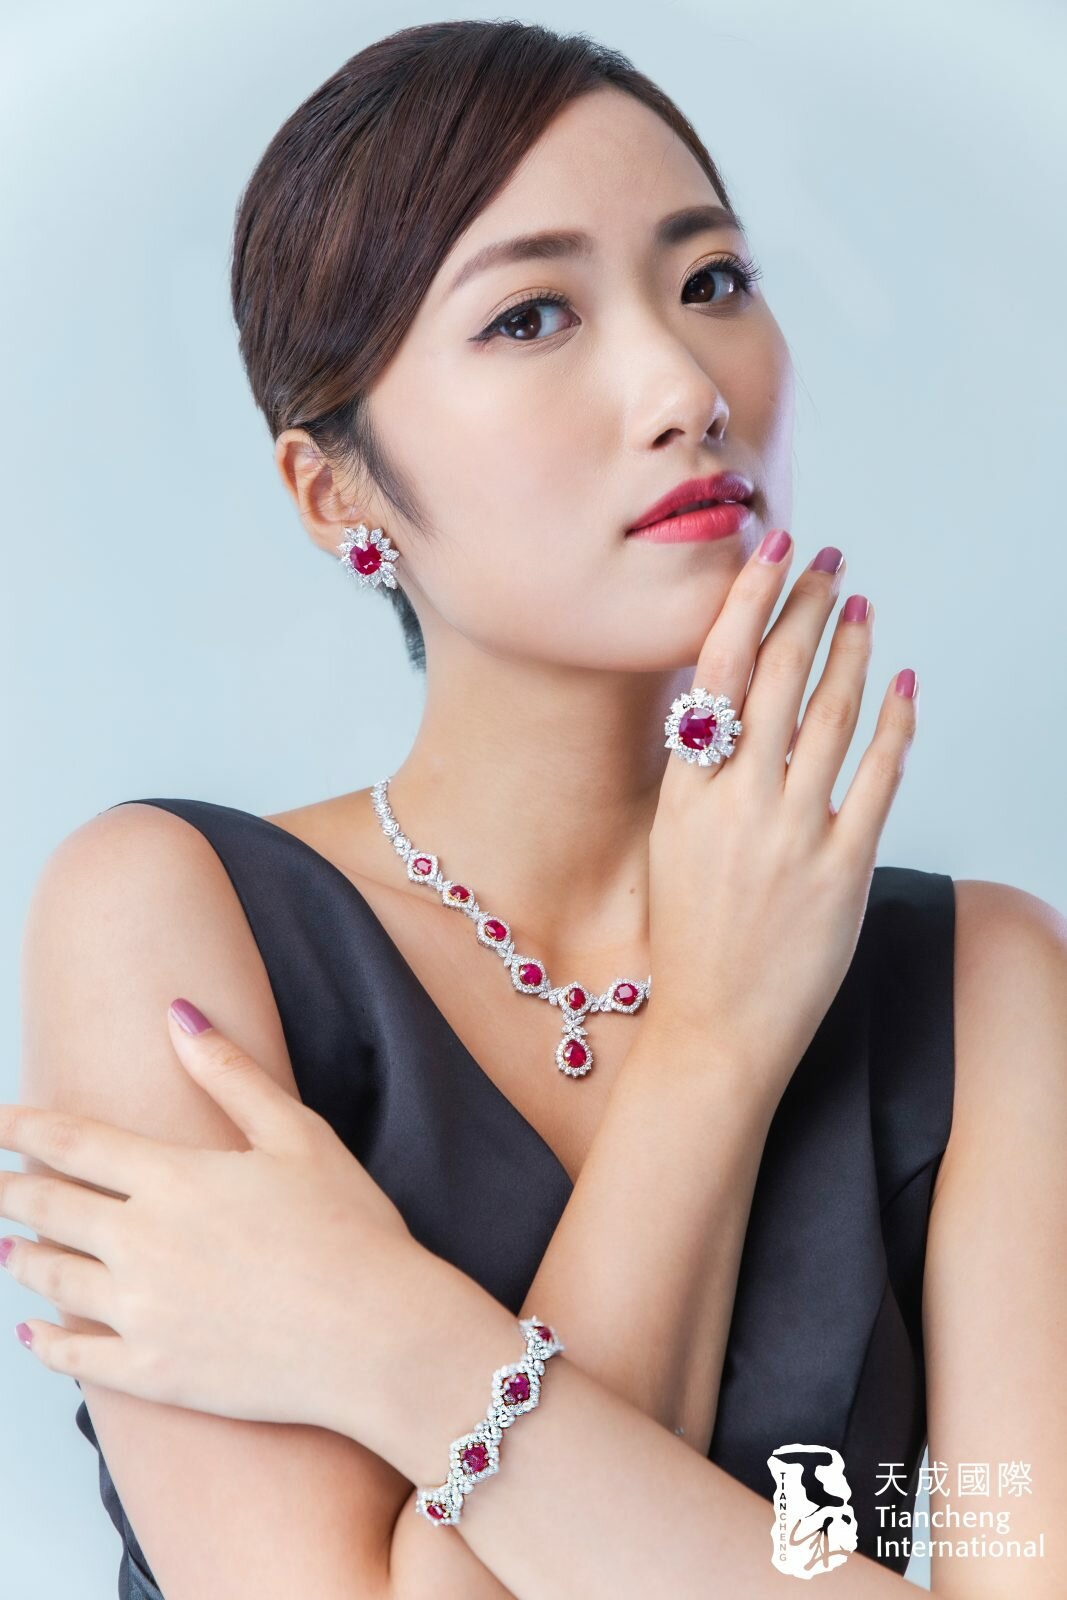 Rare Jewels To Go On Auction In Hong Kong